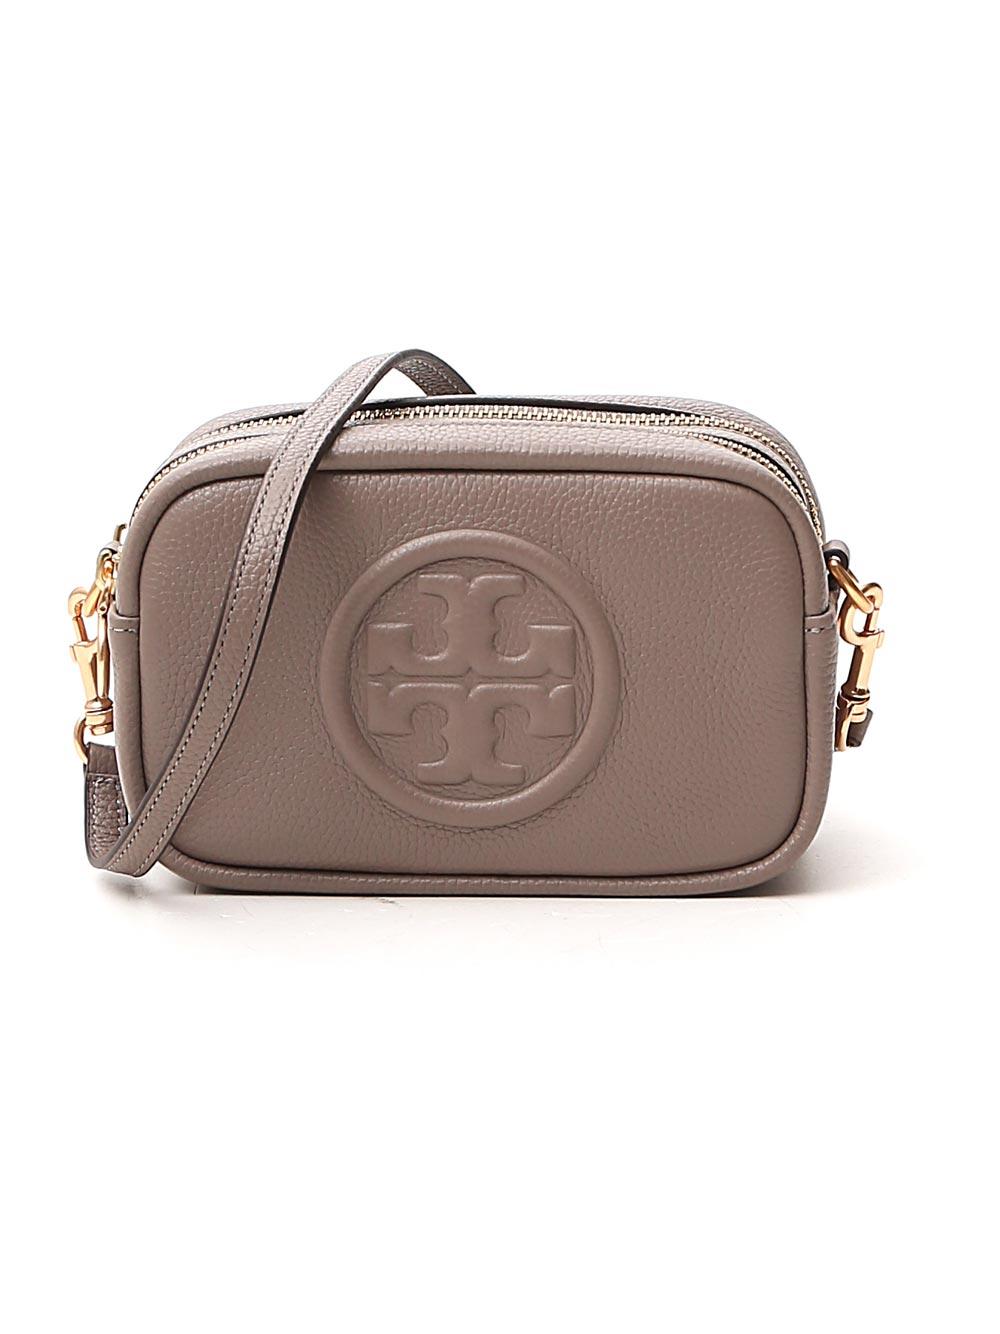 Tory Burch Leather Perry Bombé Mini Bag in Grey (Gray) - Lyst